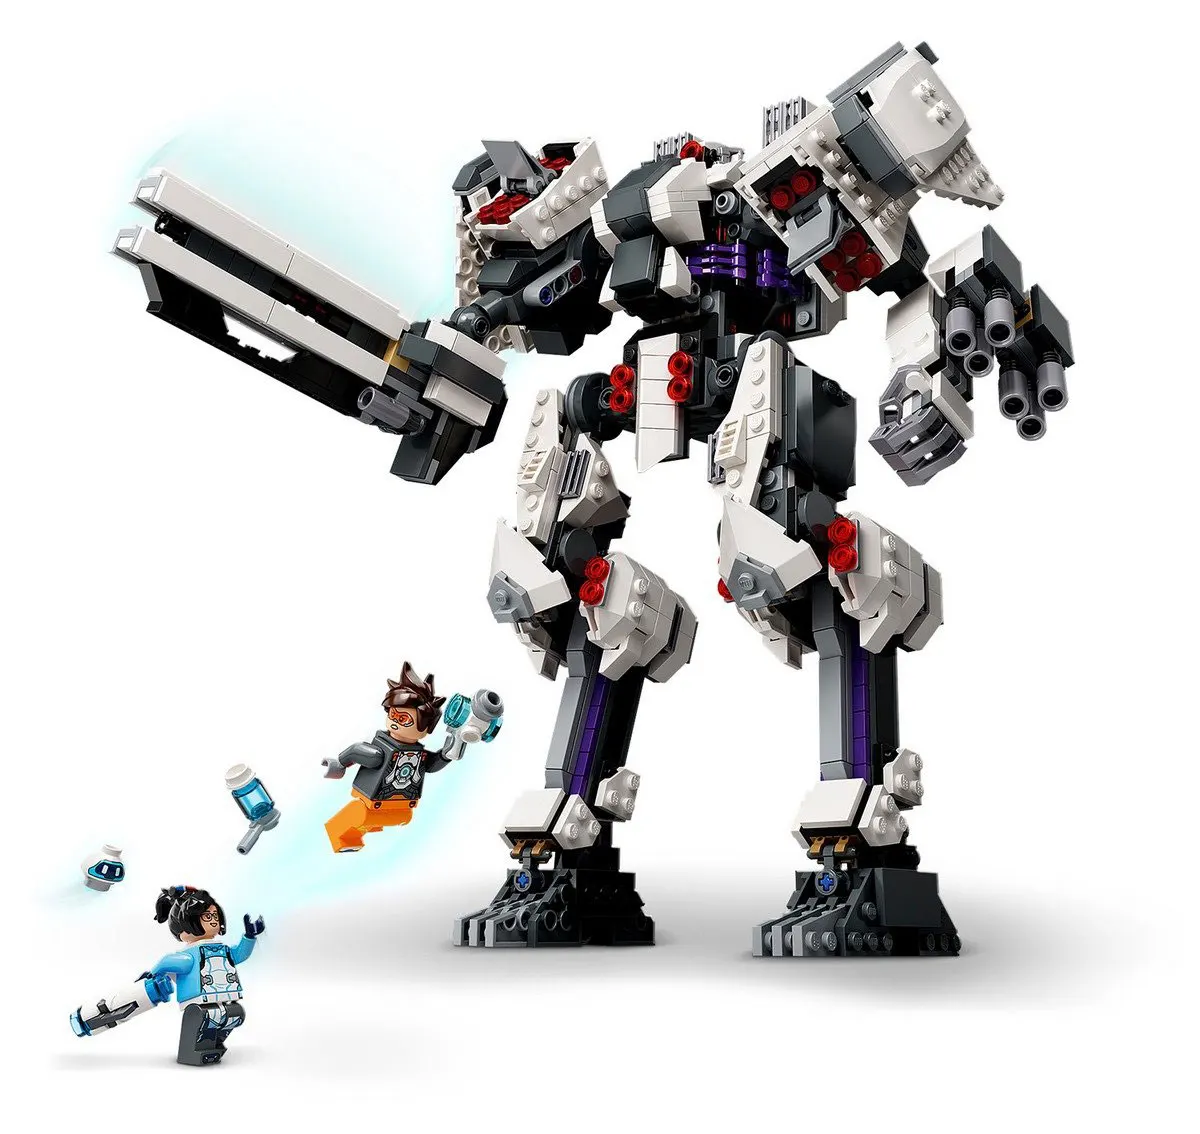 LEGO 76980 Overwatch Titan New Sets for Feb 1st 2022 Revealed